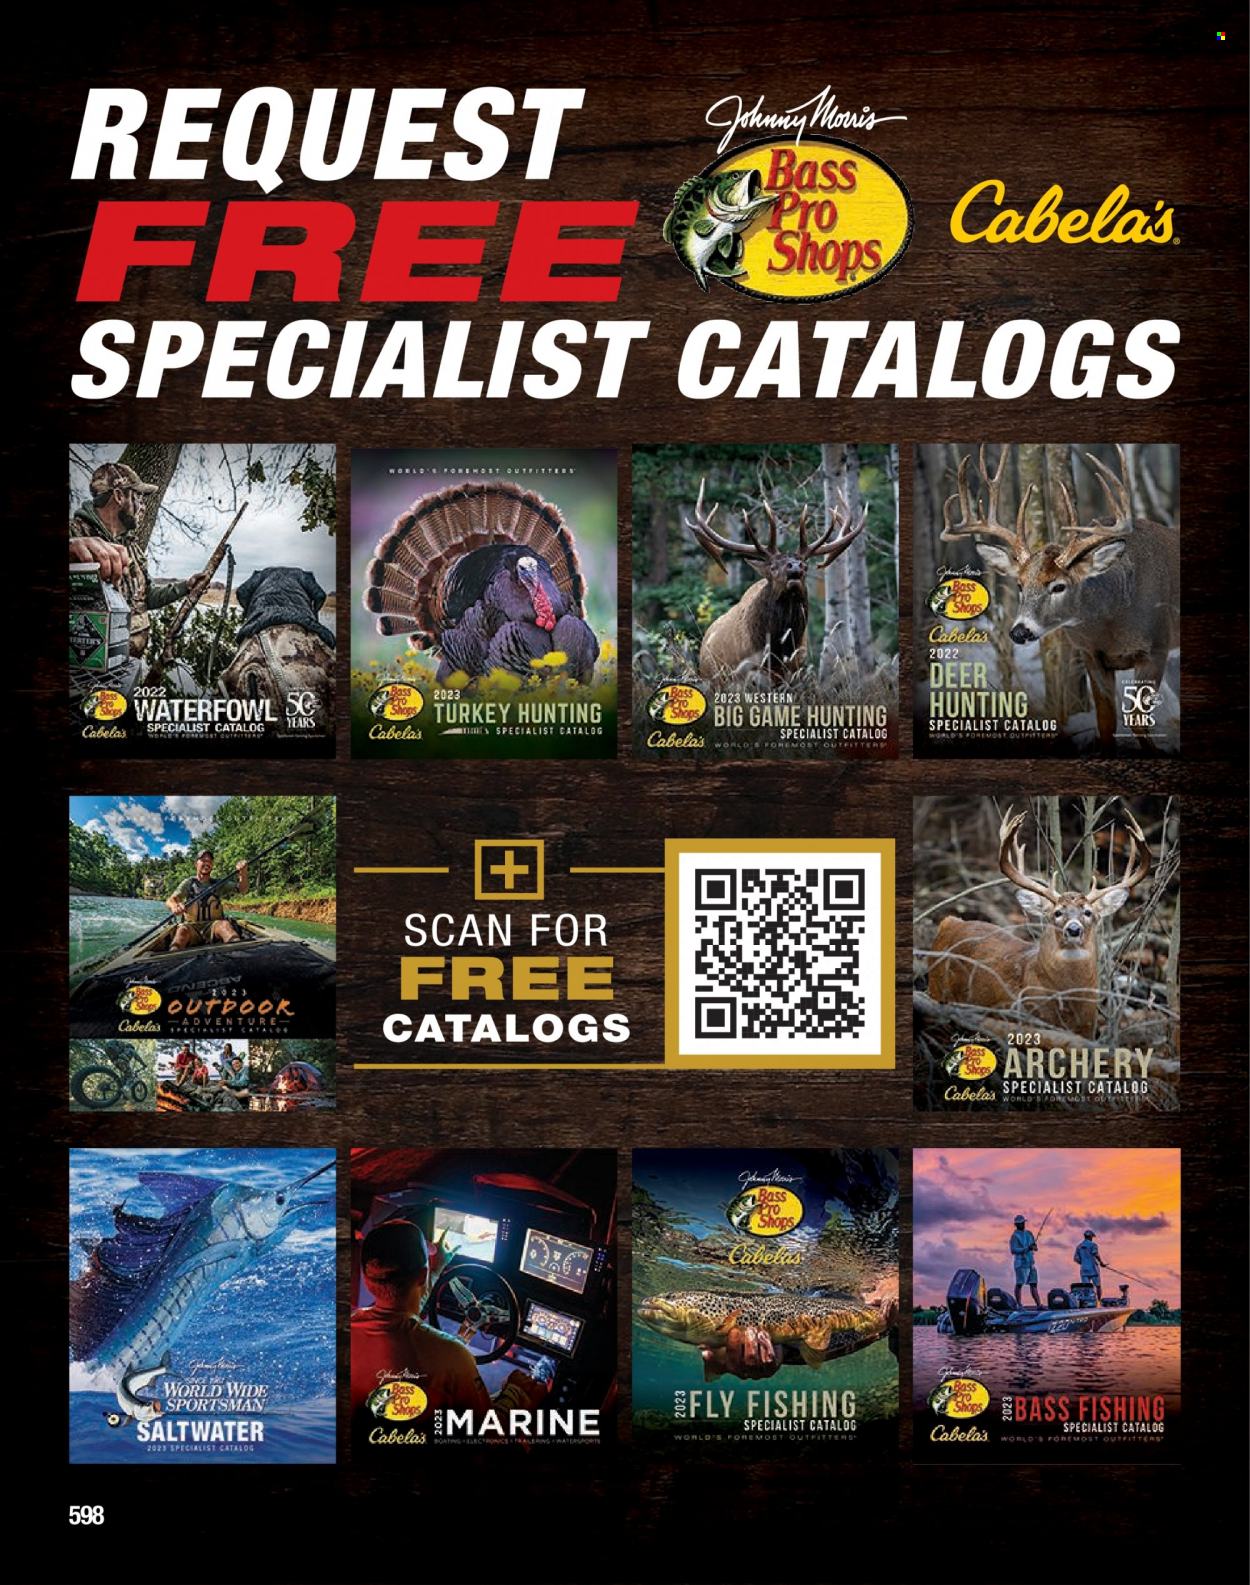 Bass Pro Shops flyer . Page 598.